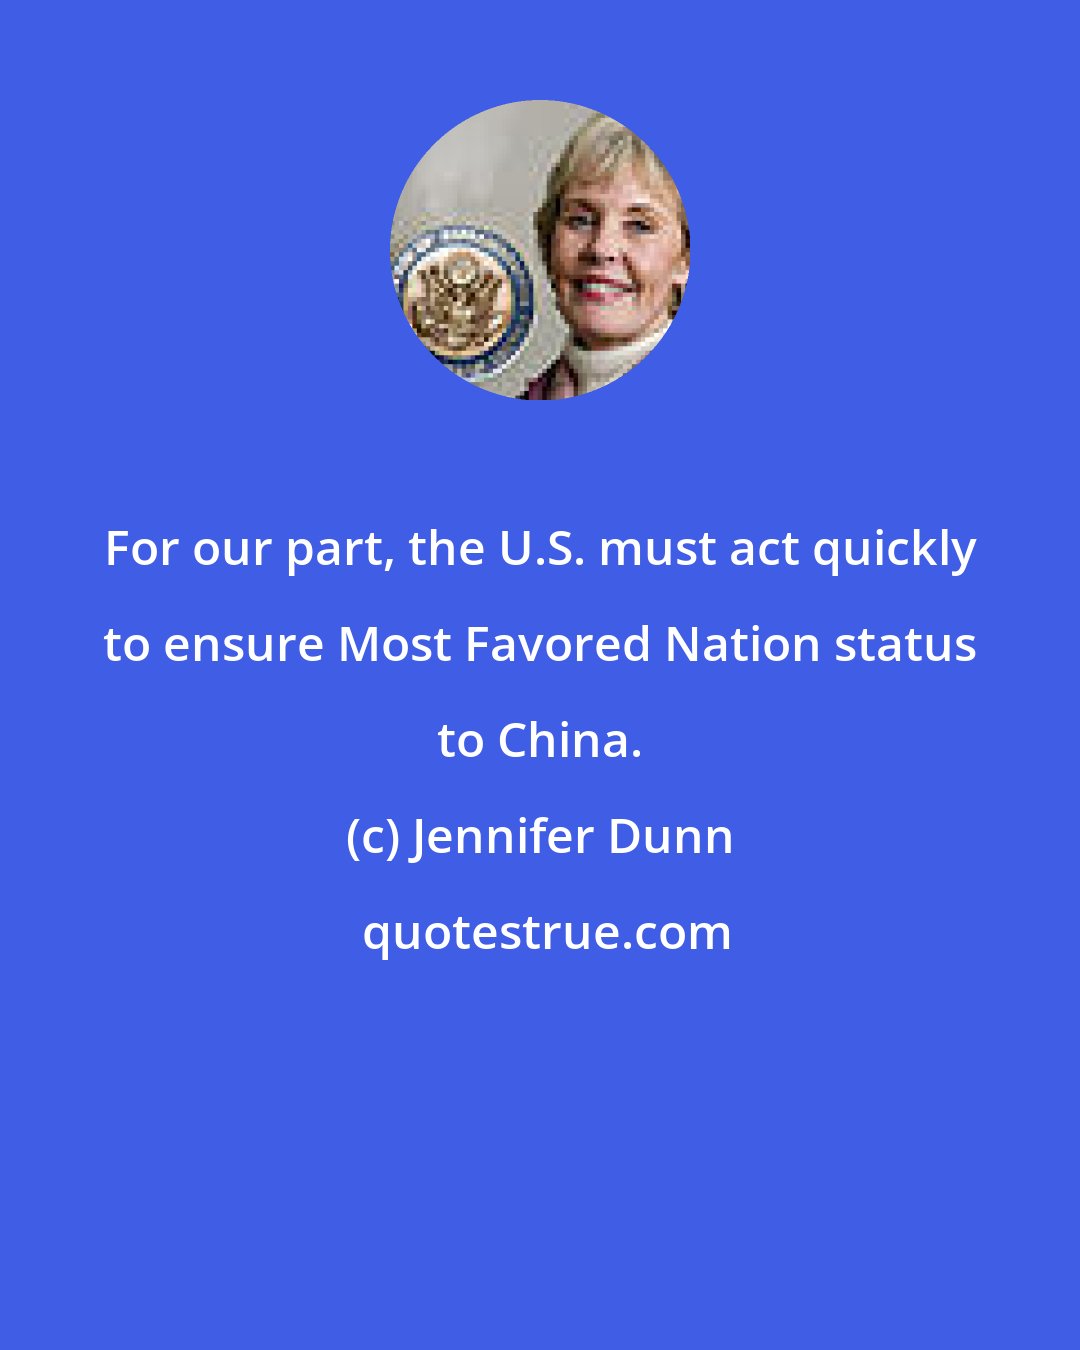 Jennifer Dunn: For our part, the U.S. must act quickly to ensure Most Favored Nation status to China.